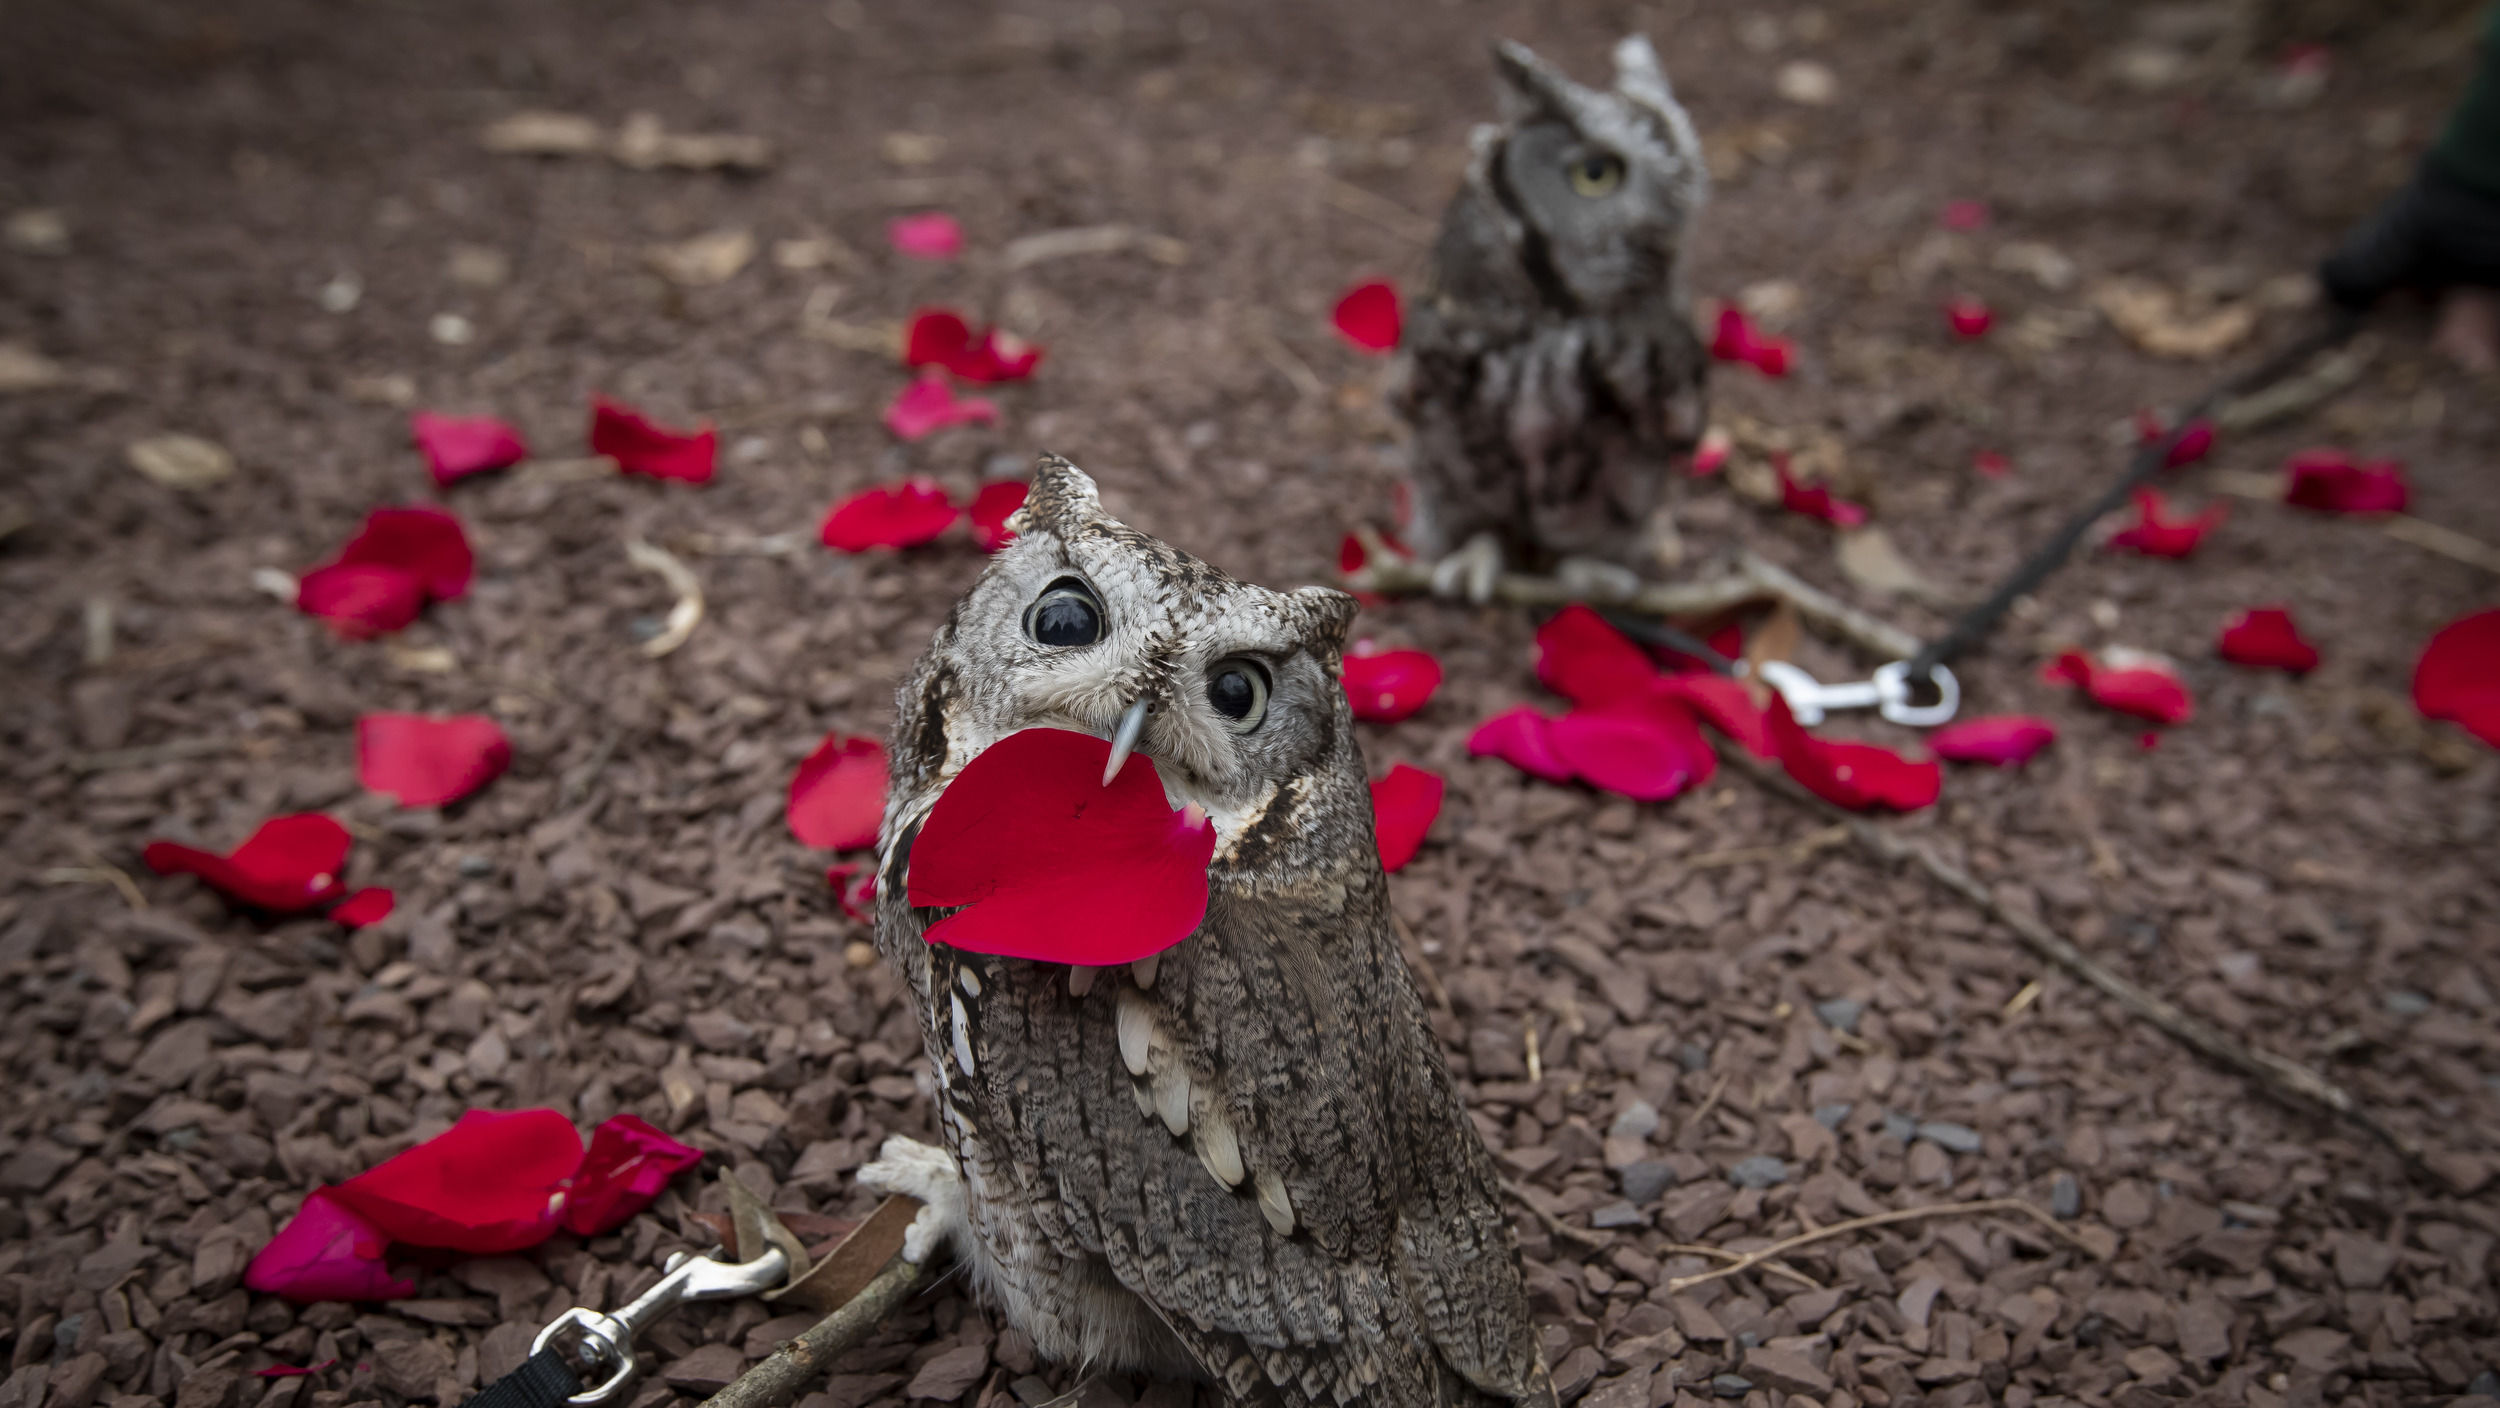 Image of Temple mascot Stella the Owl.